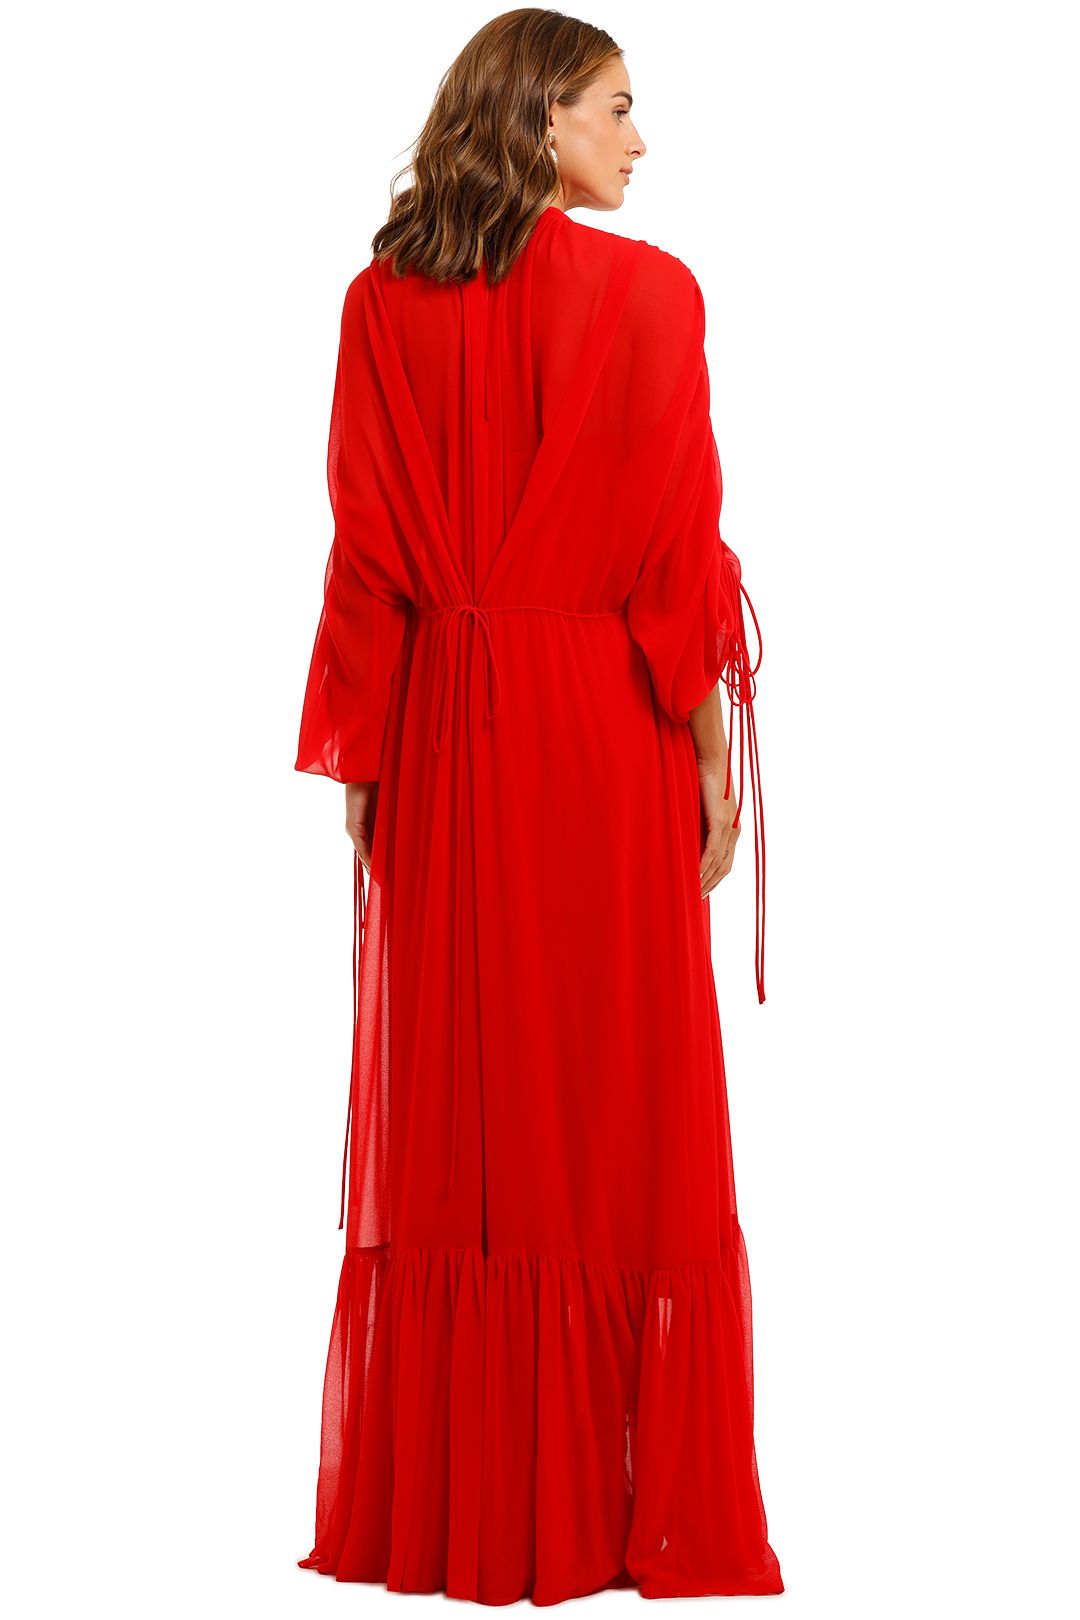 Camilla and Marc Catalina Maxi Dress Relaxed Fit